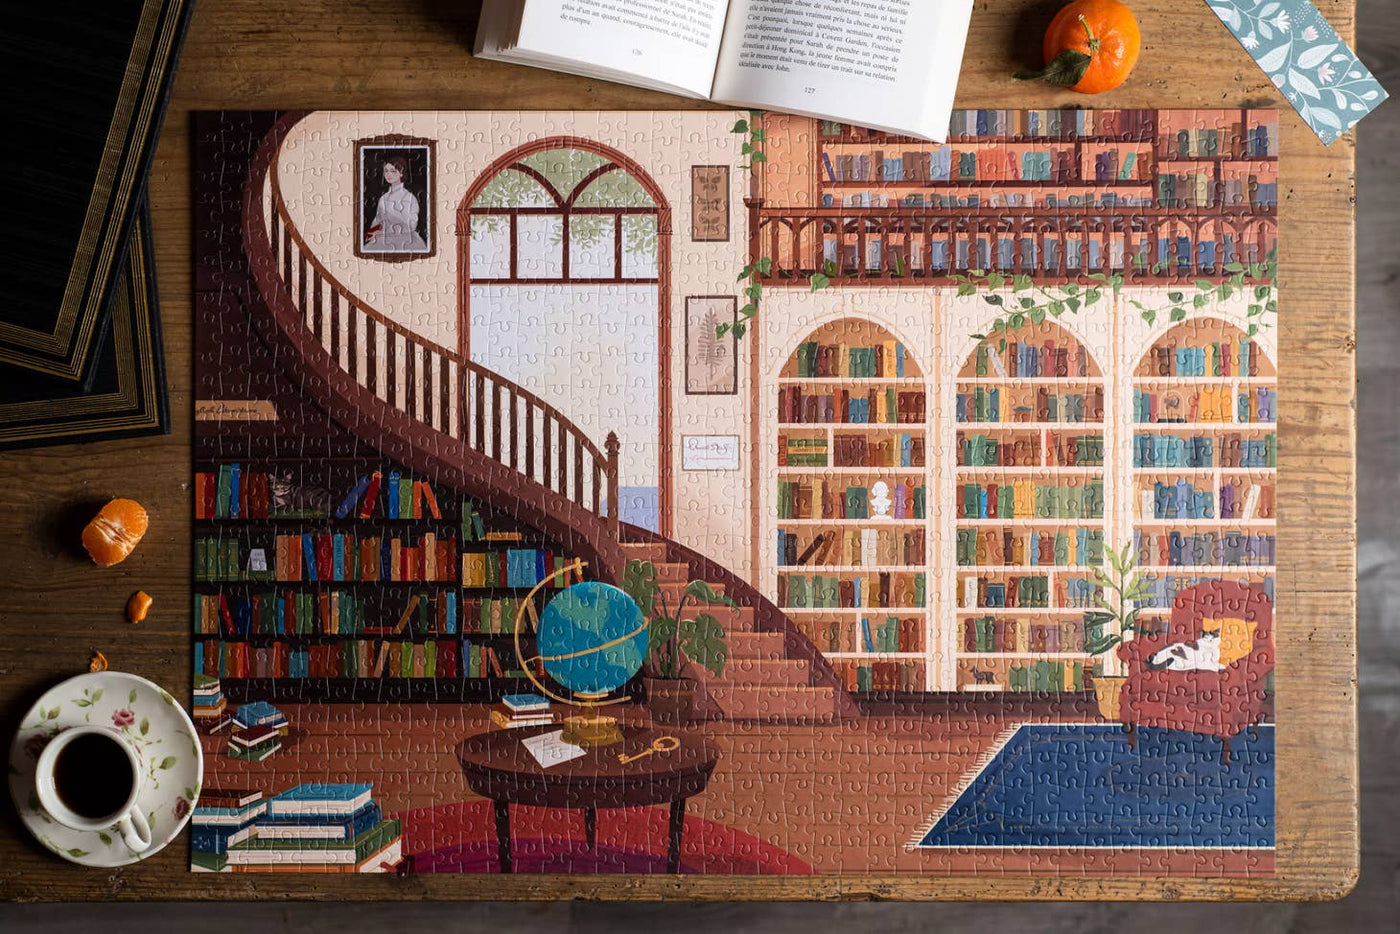 At the Library | 1,000 Piece Jigsaw Puzzle